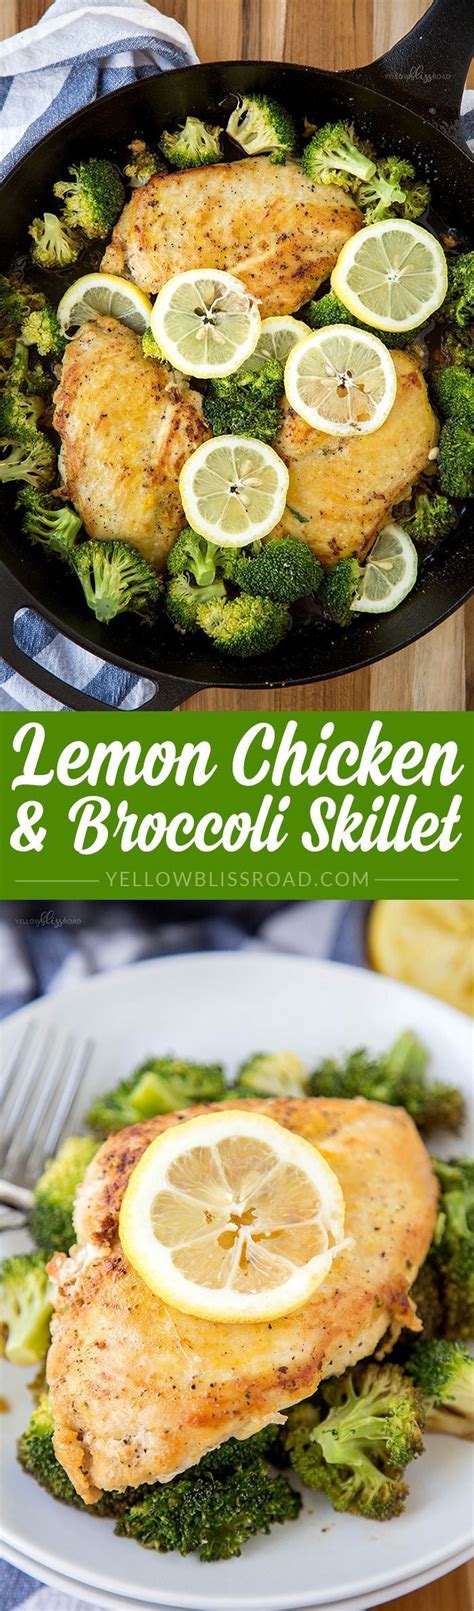 Lemon Chicken Broccoli Skillet 30 Minutes And One Skillet Is All You